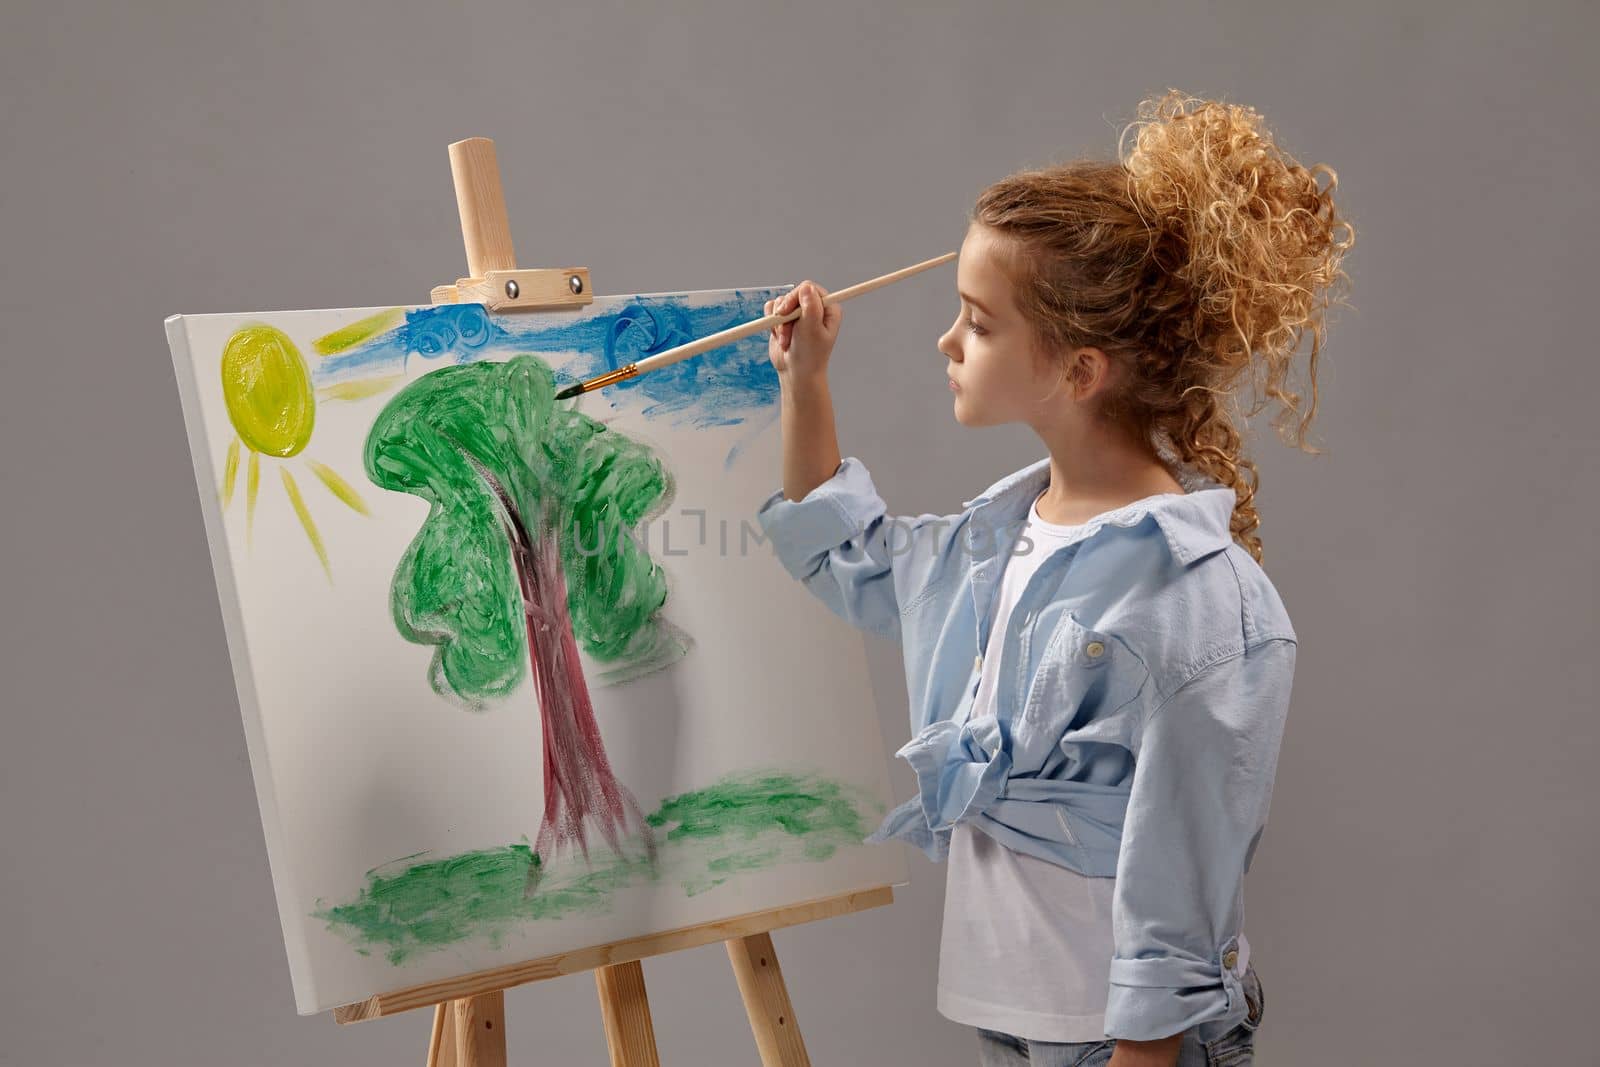 Nice school girl whith a curly blond hair, wearing in a blue shirt and white t-shirt is painting with a watercolor brush on an easel, standing on a gray background.